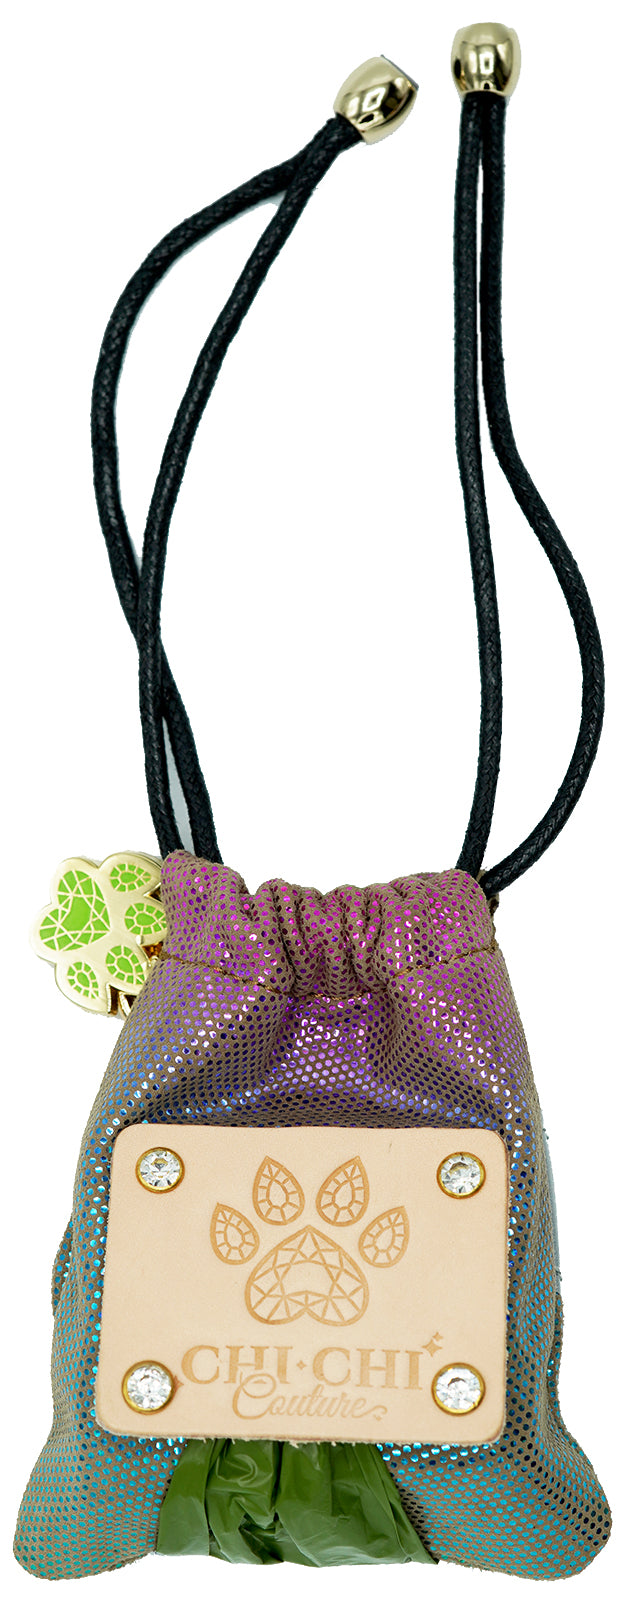 Chi Chi Couture PICK IT UP BAG - Rainbow